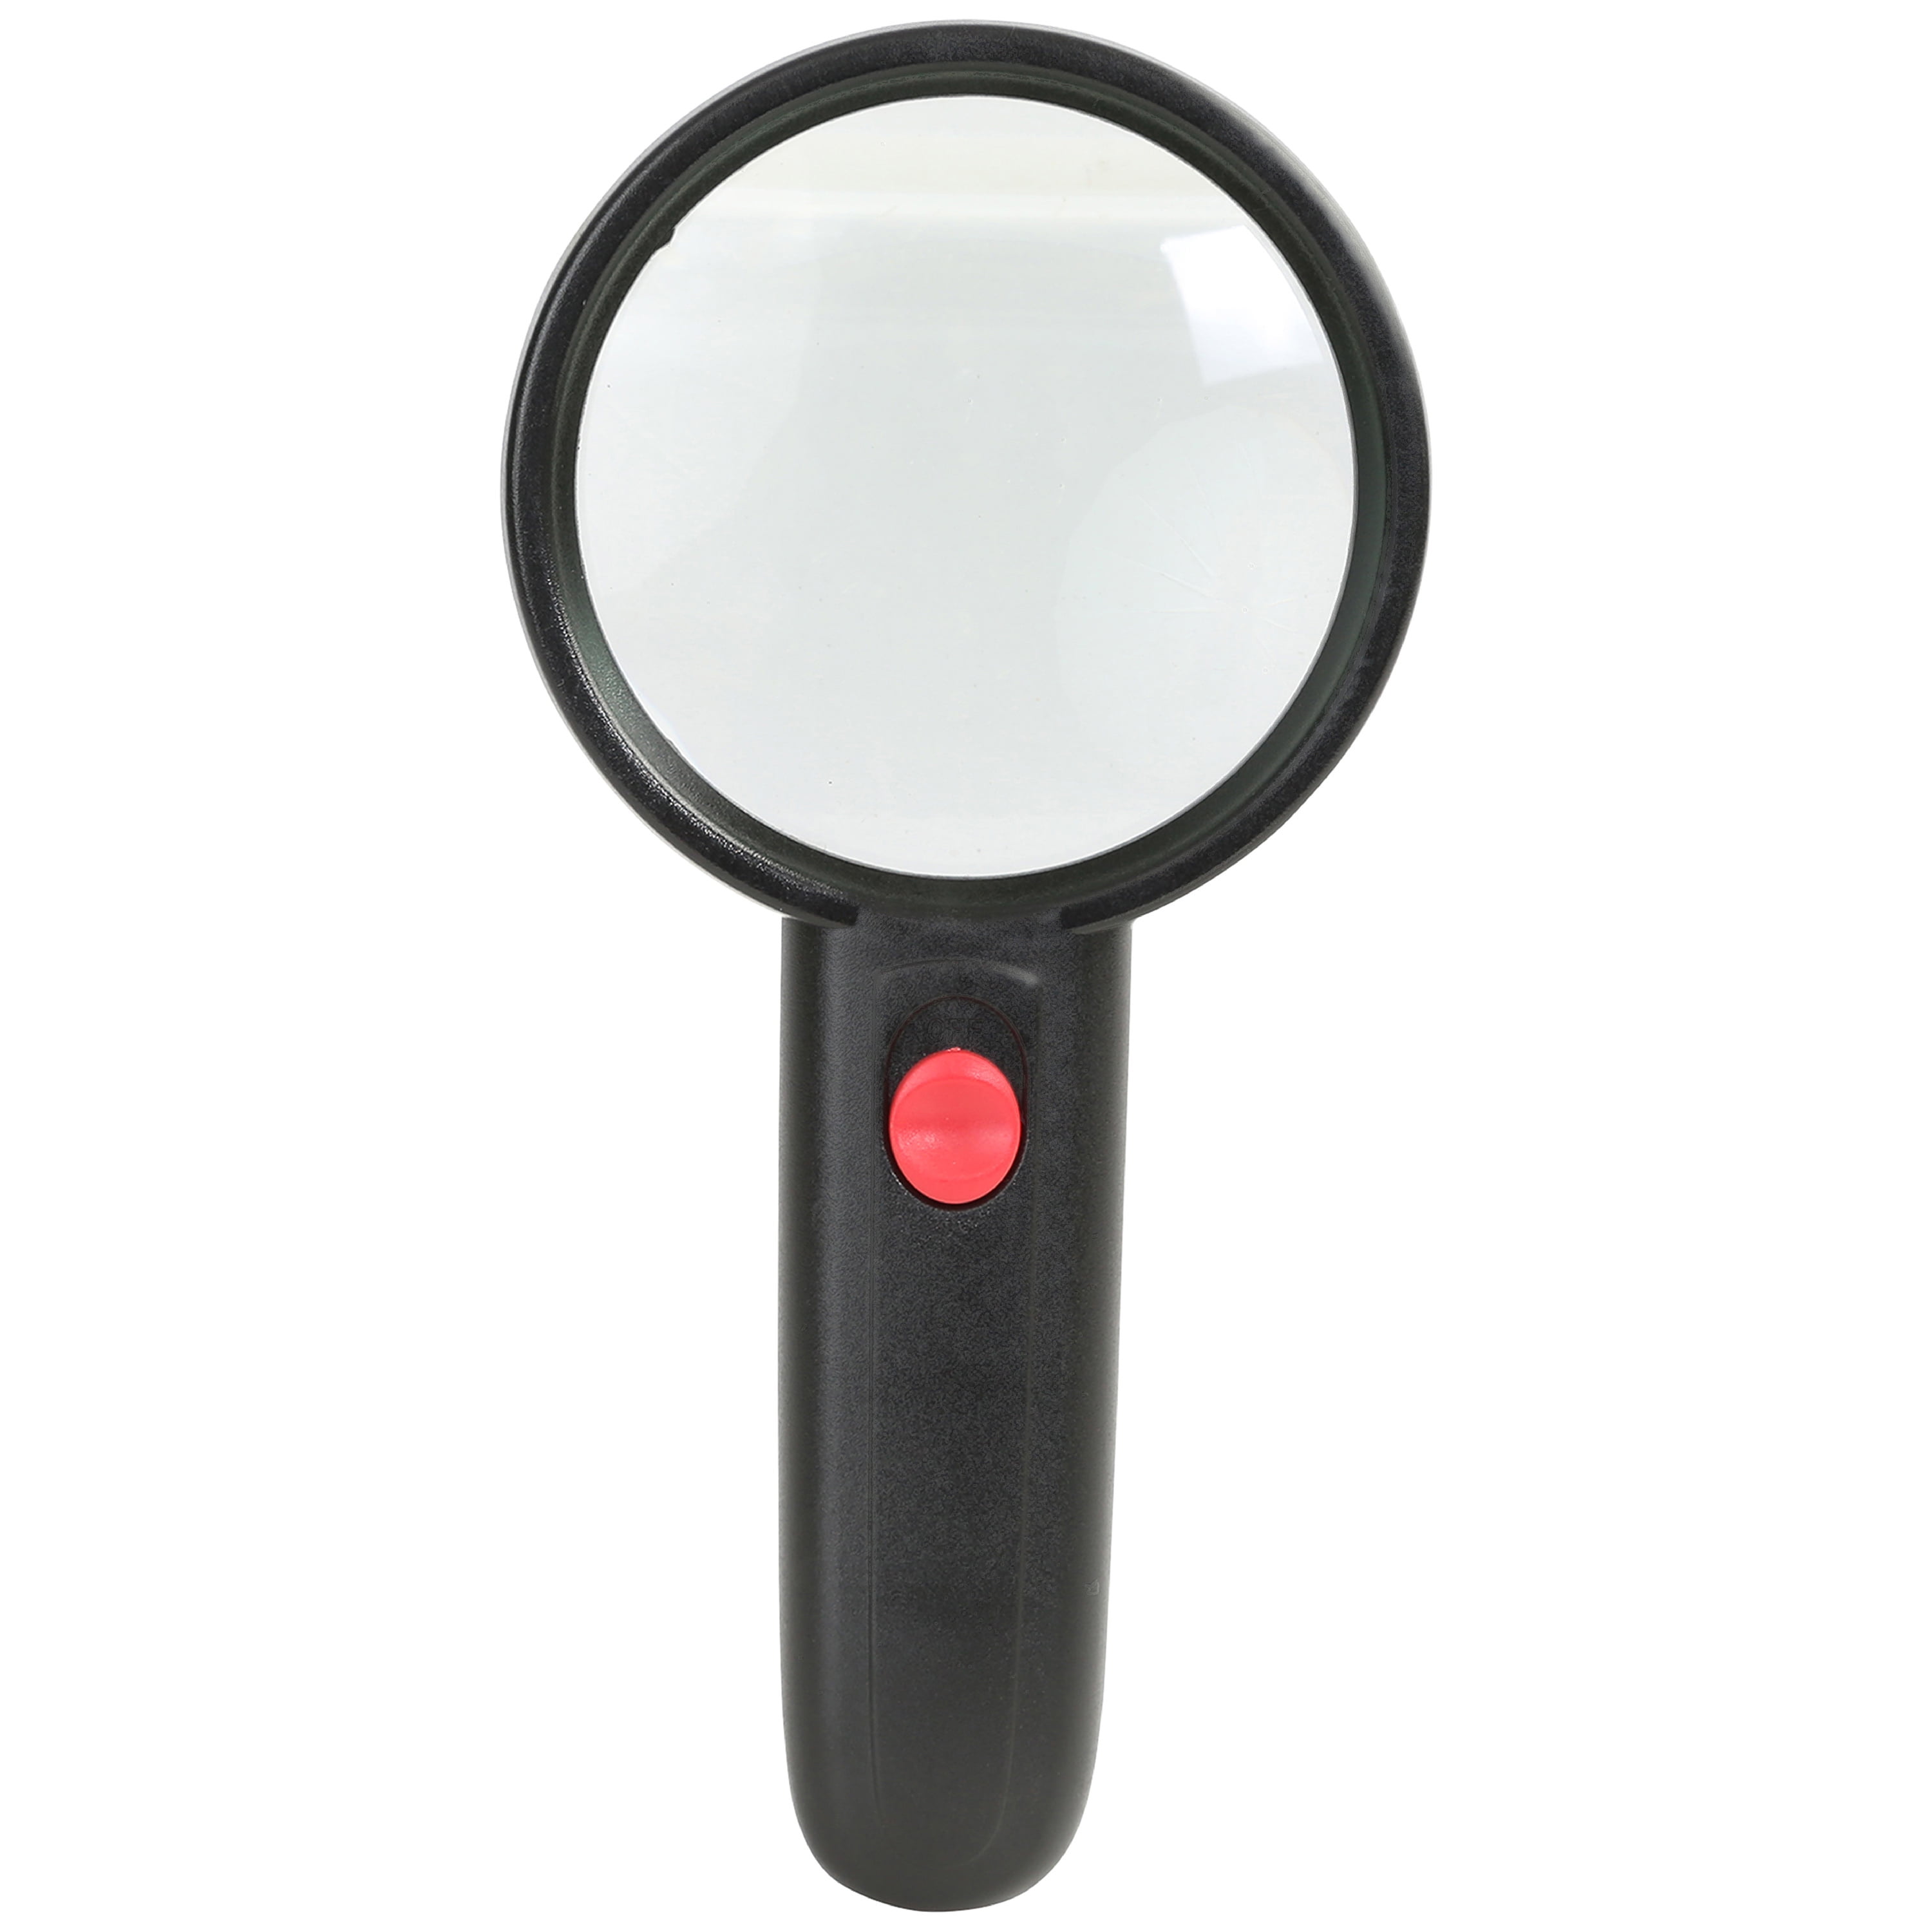 Hyper Tough LED Lighted 3x Magnifying Glass